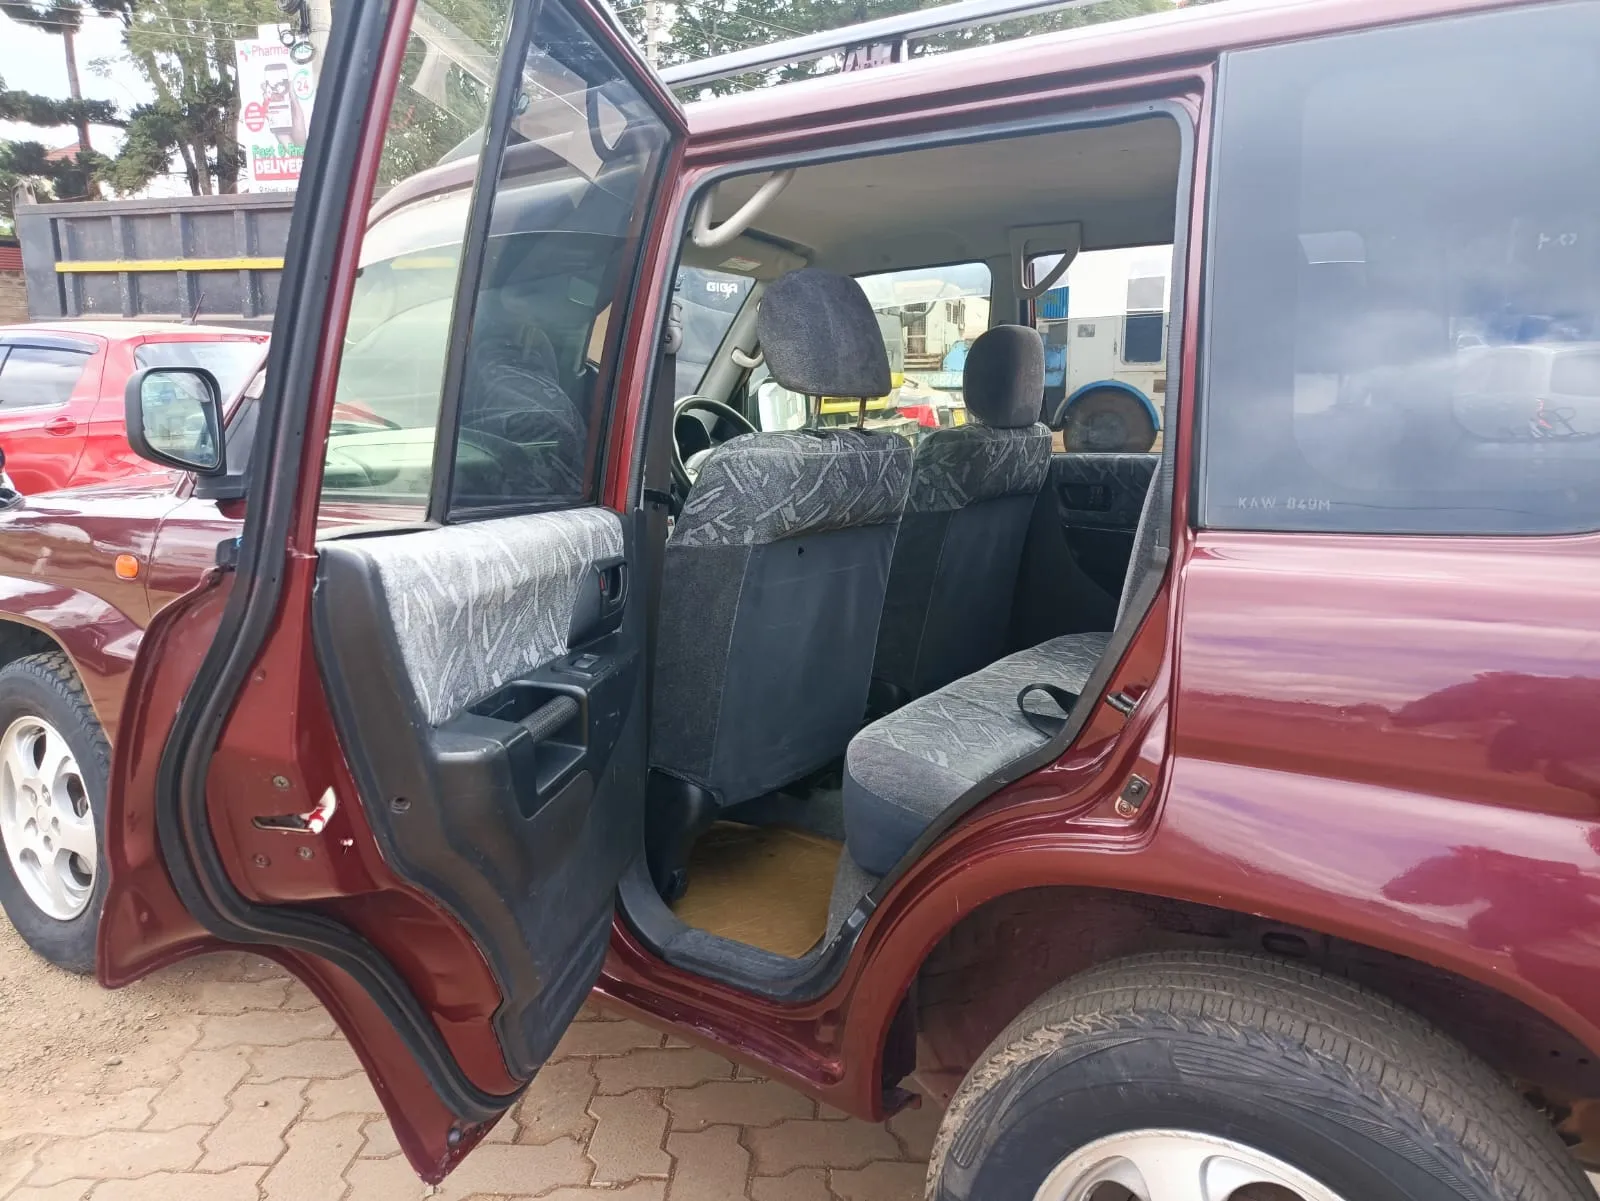 Mitsubishi Pajero IO for sale in Kenya 299K ONLY 30% Pay Deposit Trade in Ok Hot Deal (SOLD)